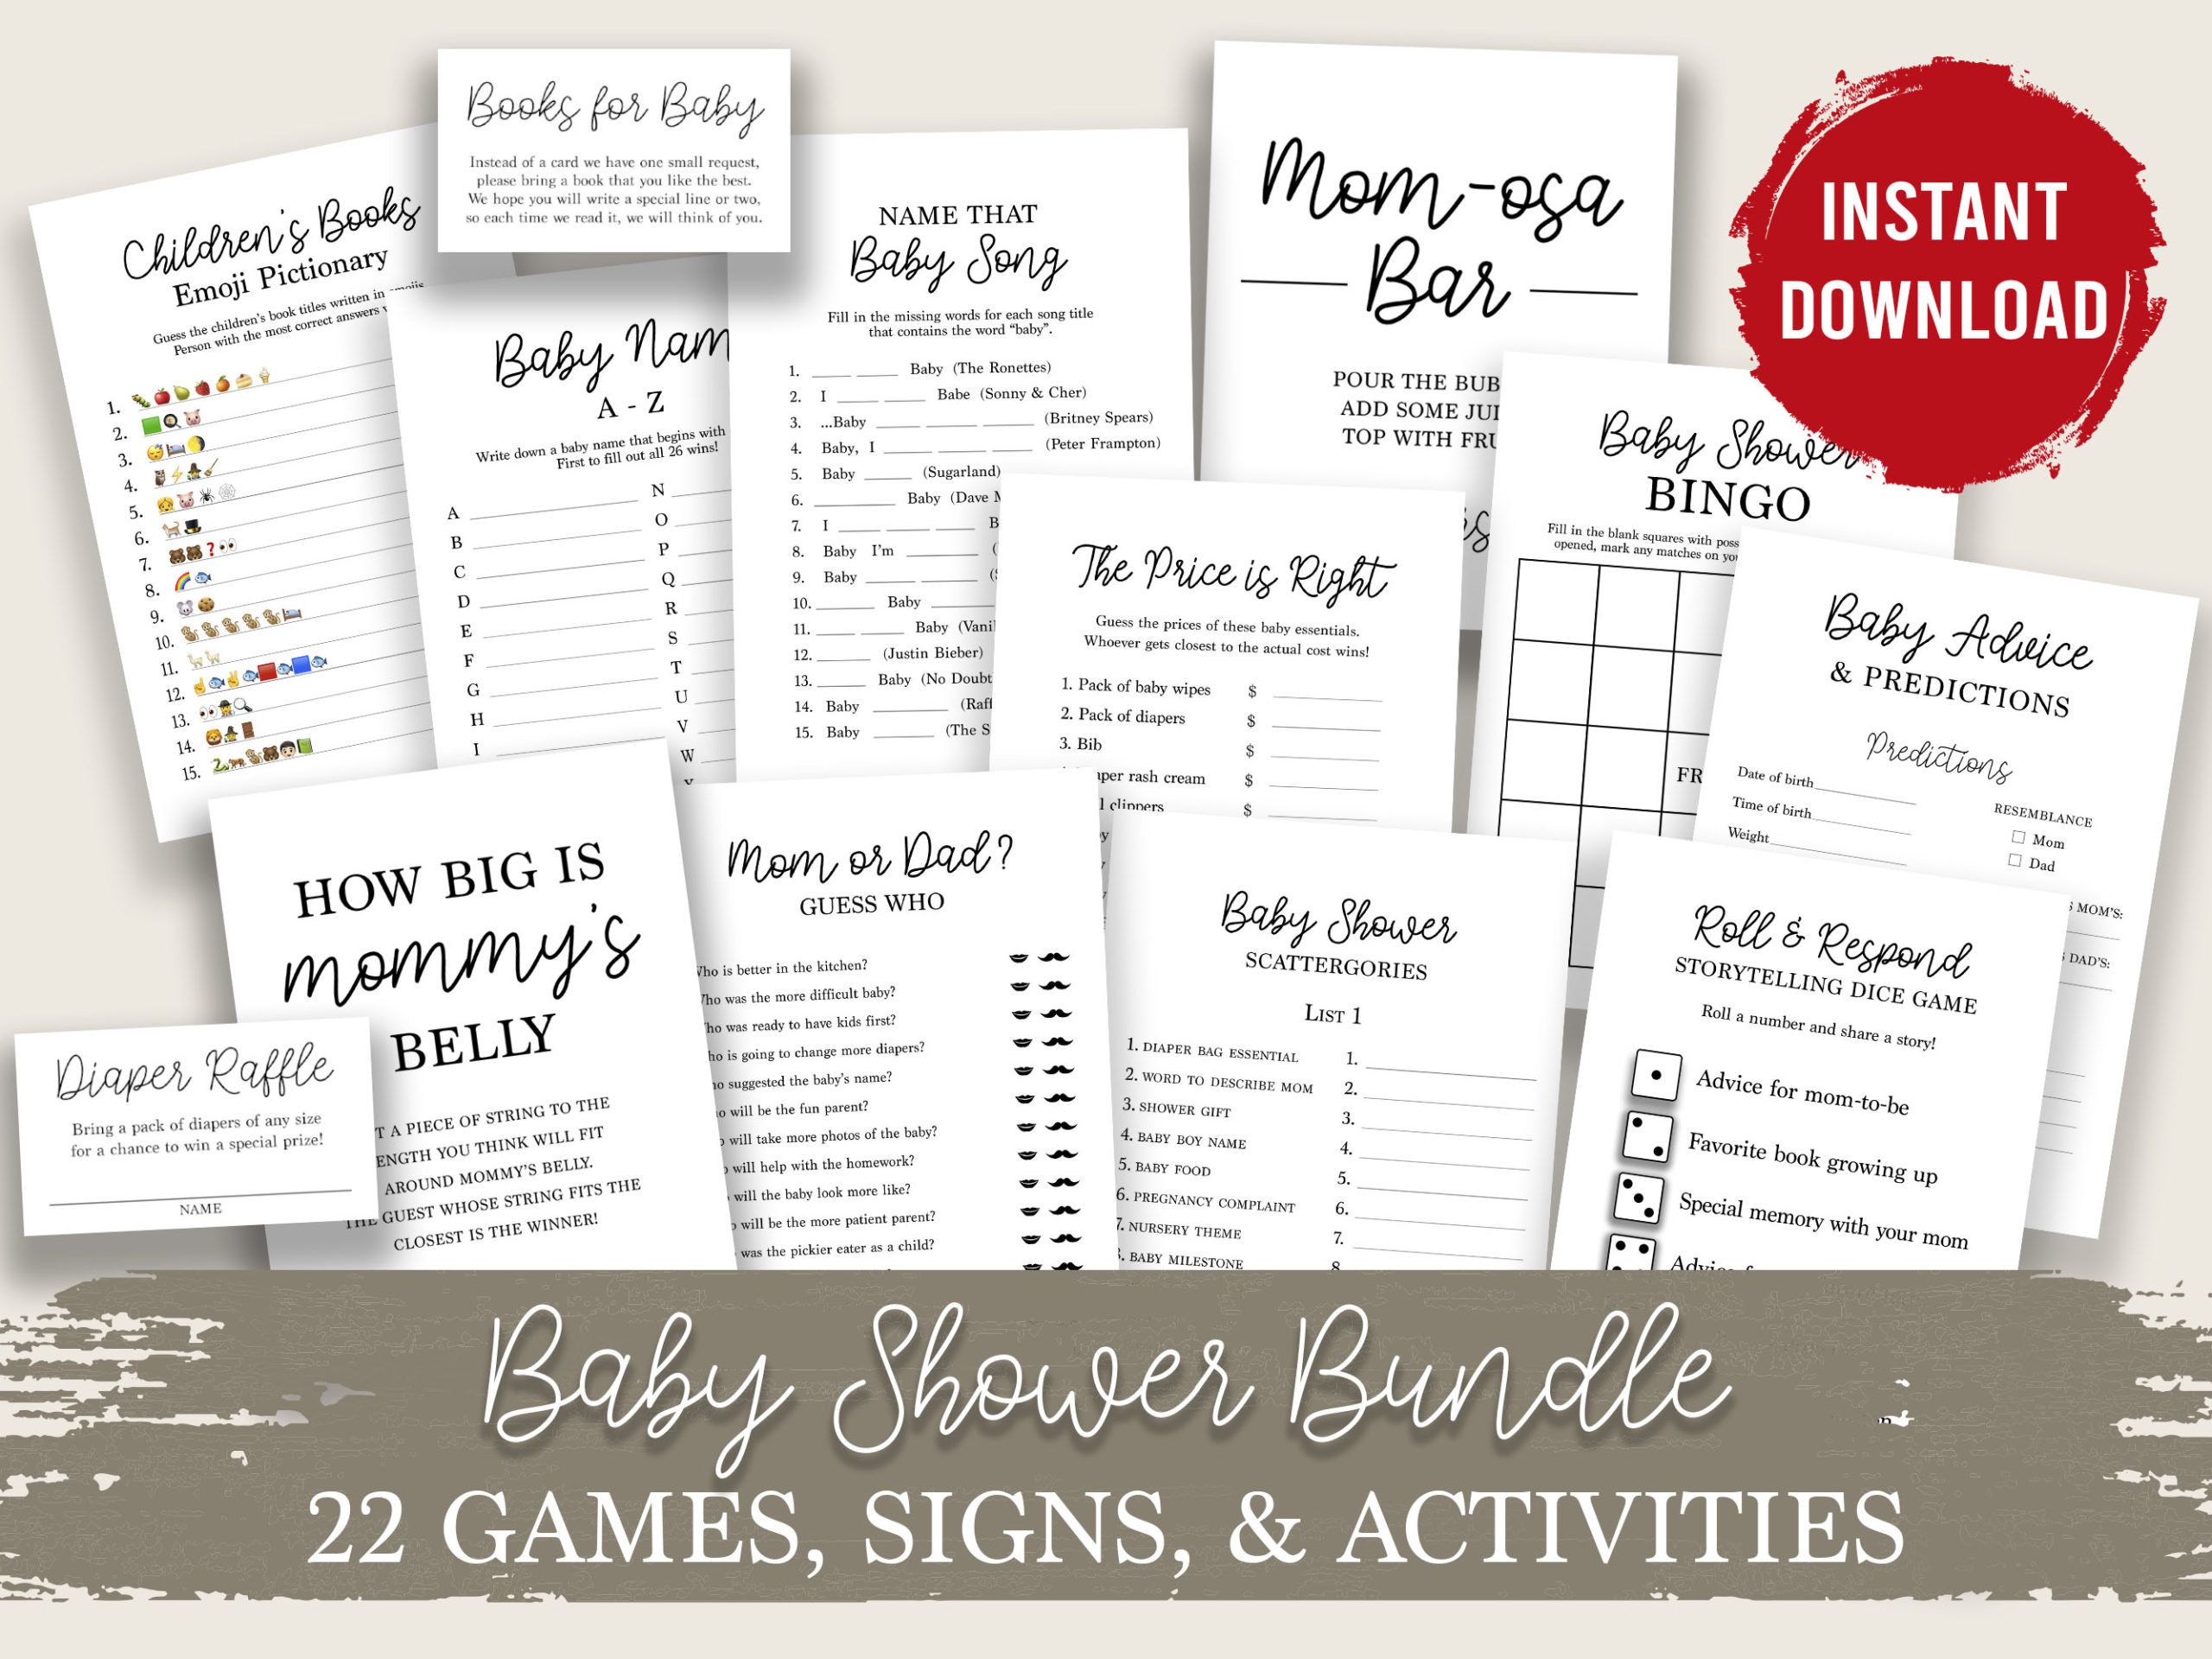 Ultimate Baby Shower Bundle! 22 Downloadable Shower Signs, Games, and Activities